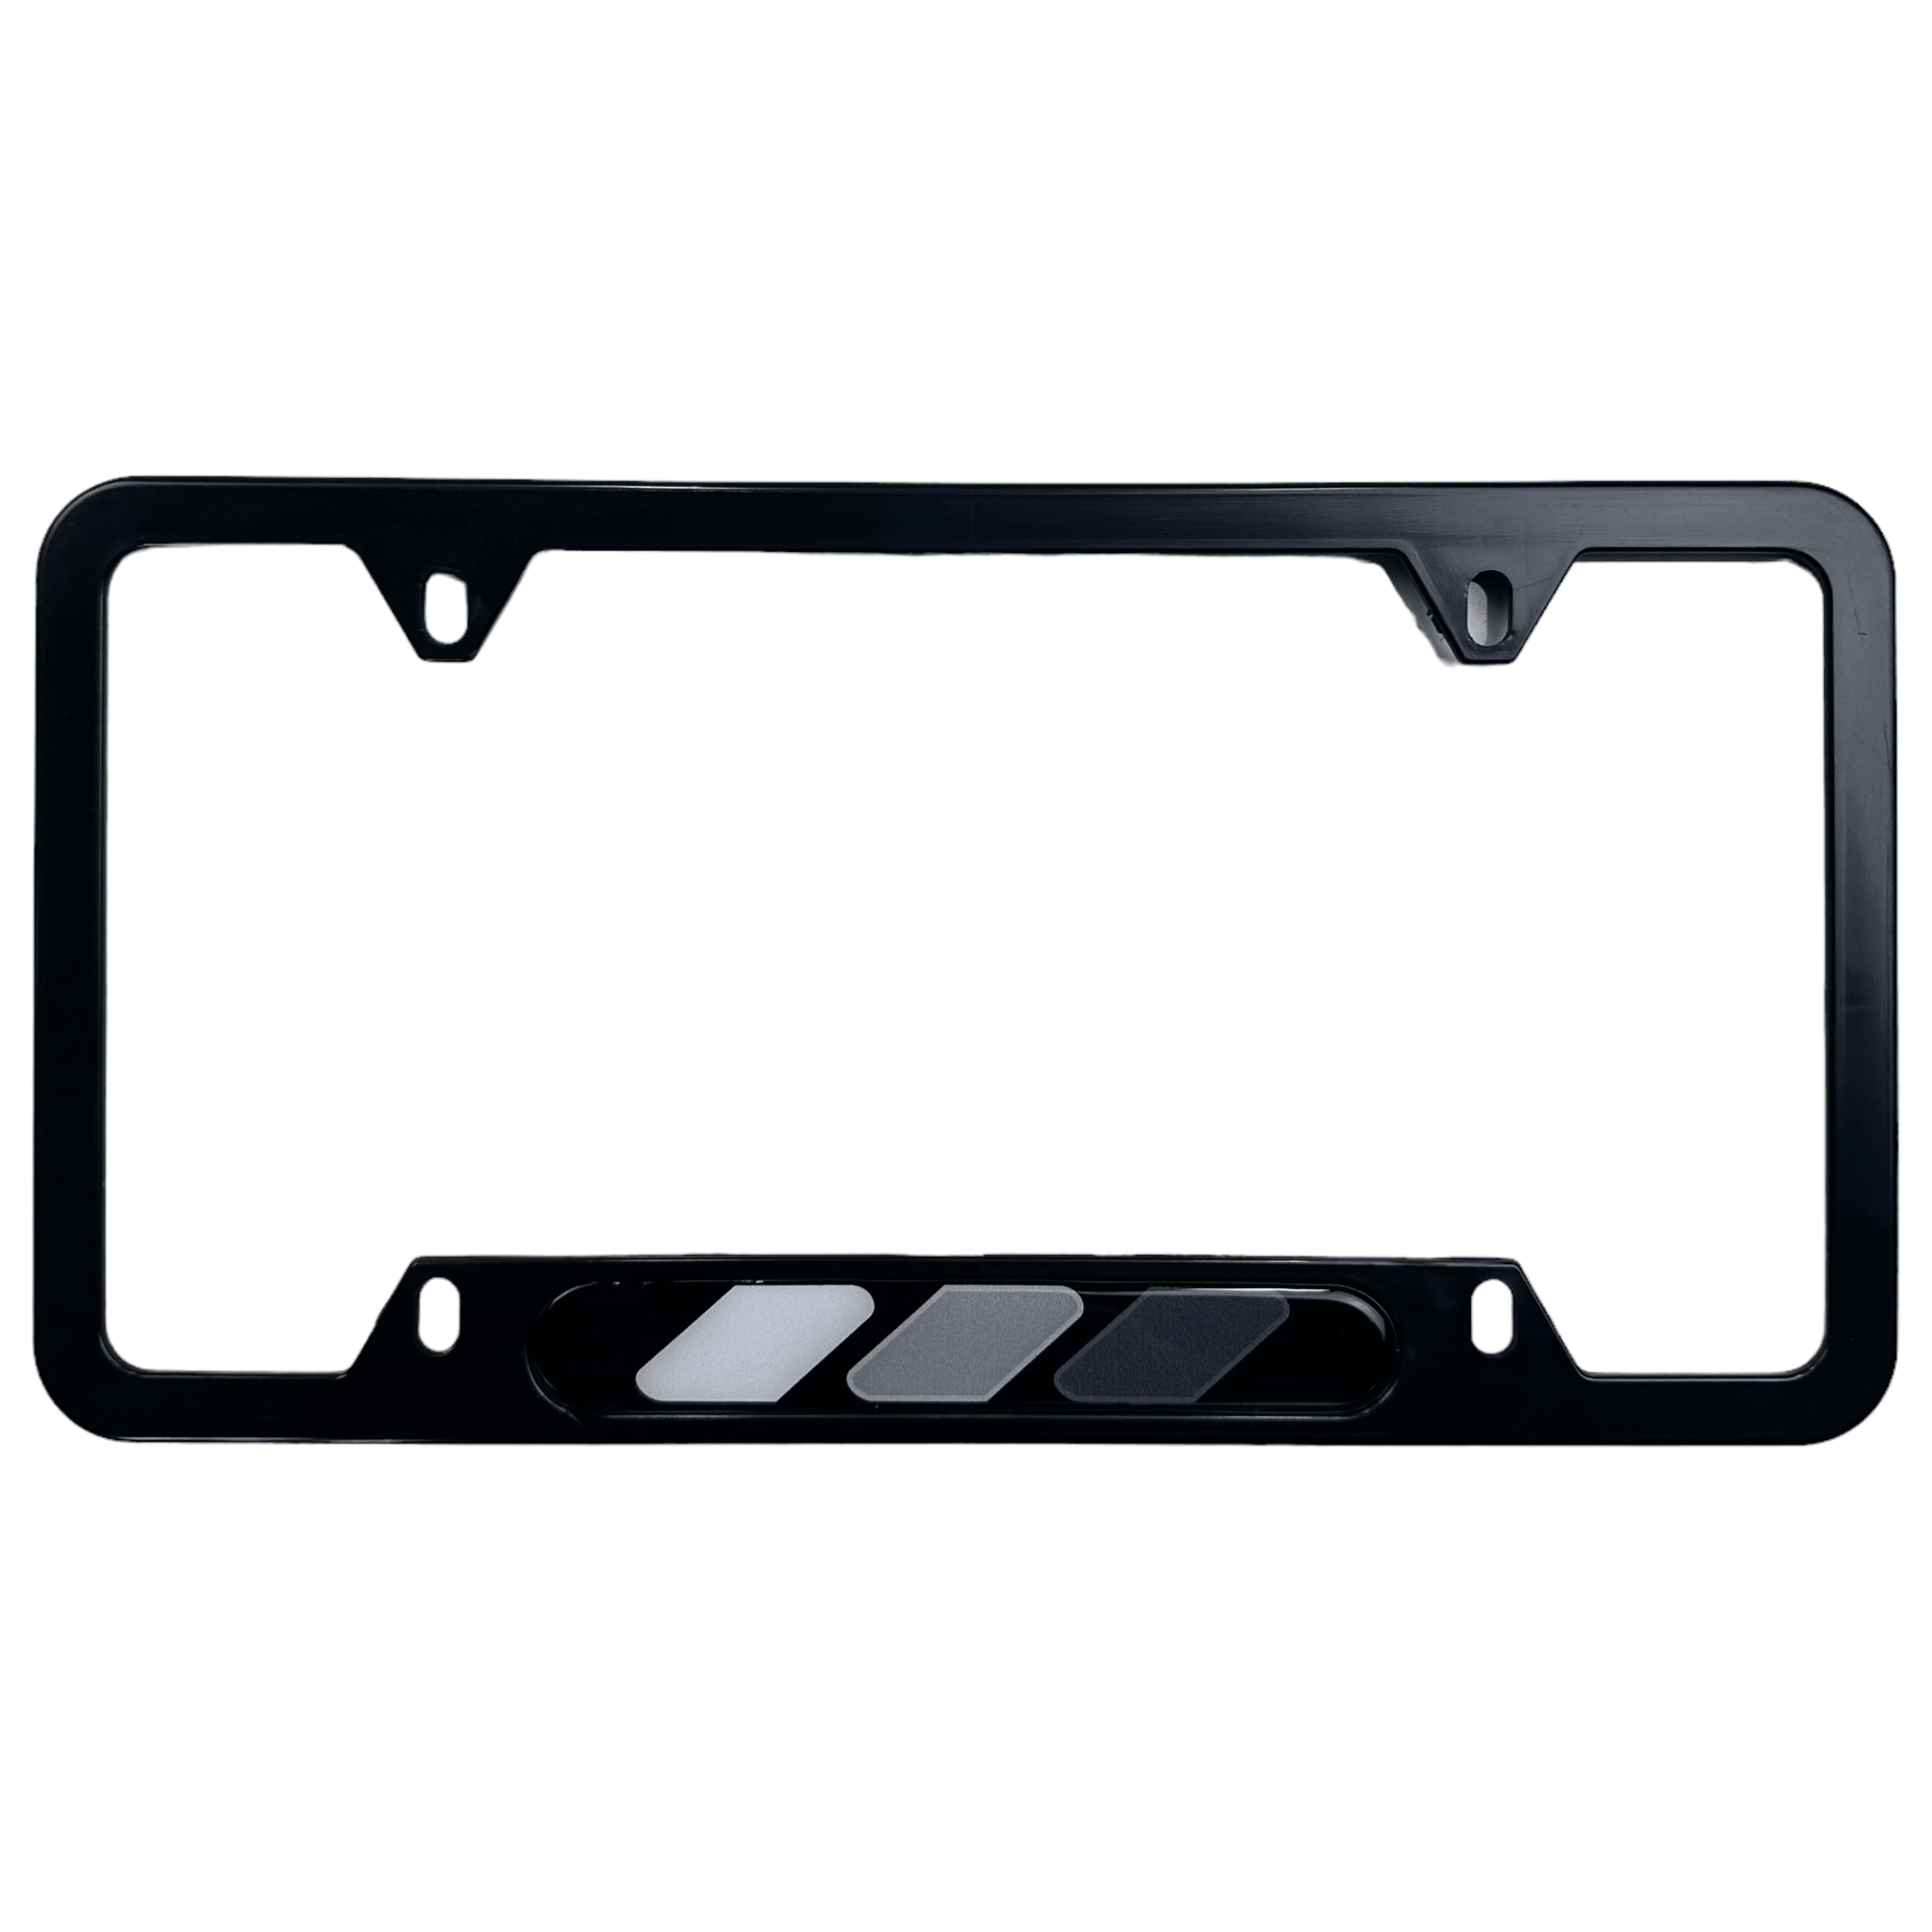 Autowin Number Plate Holder USA Standard Size Retro